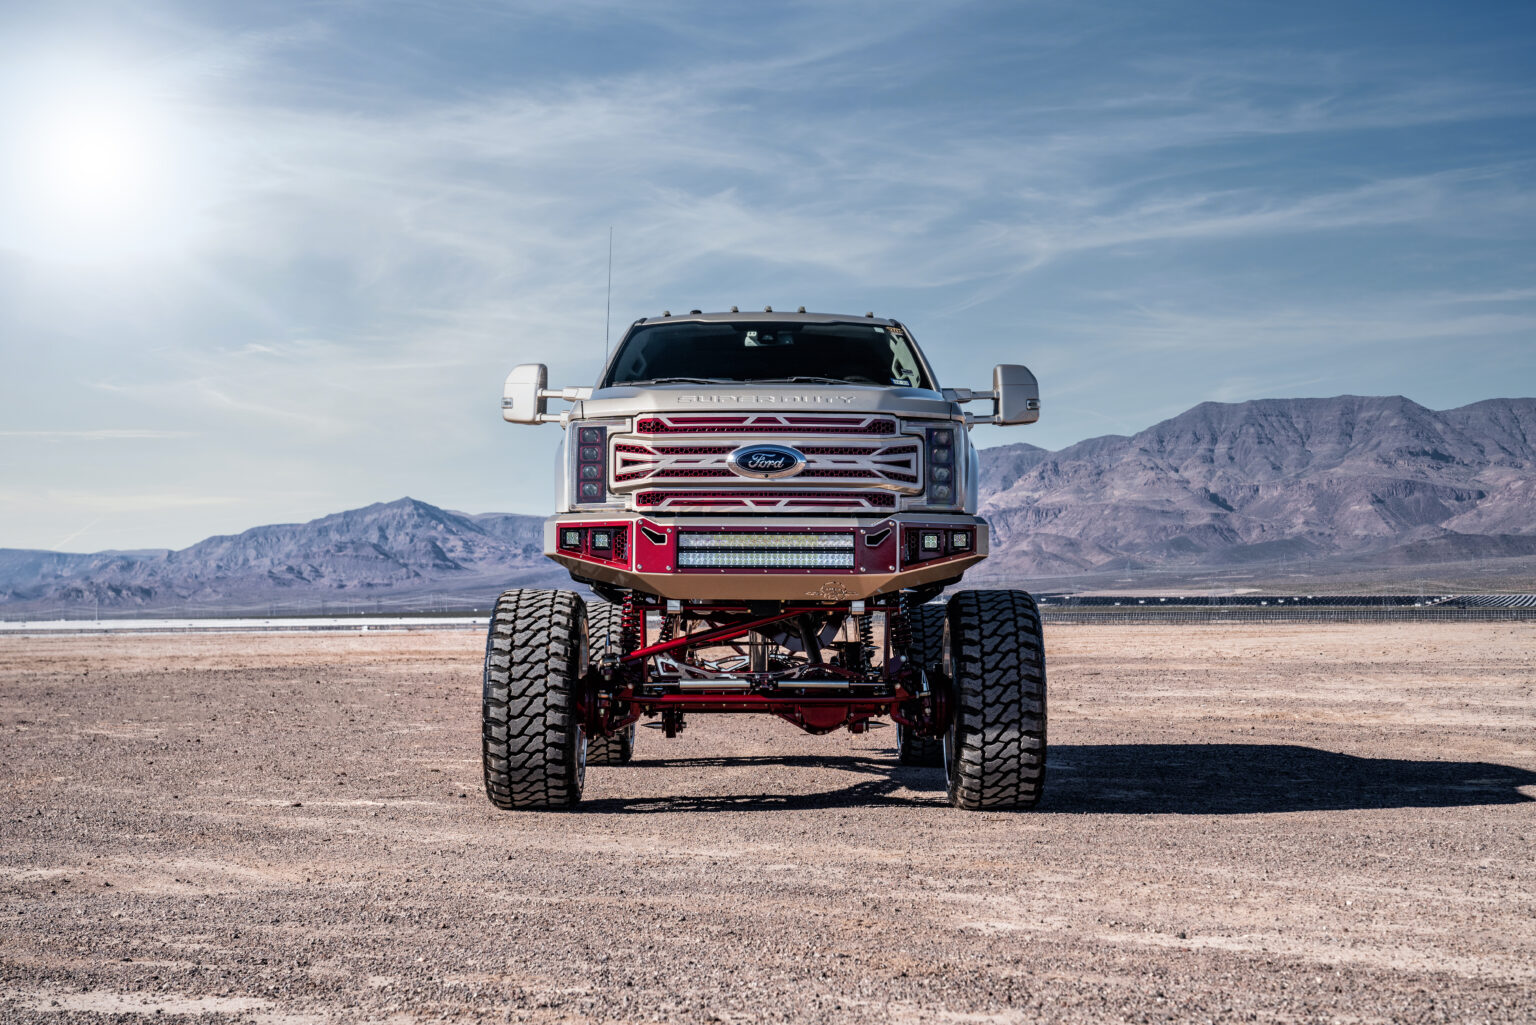 Smoky Mountain Truck Fest Celebrating the Best of KG1 Lifted